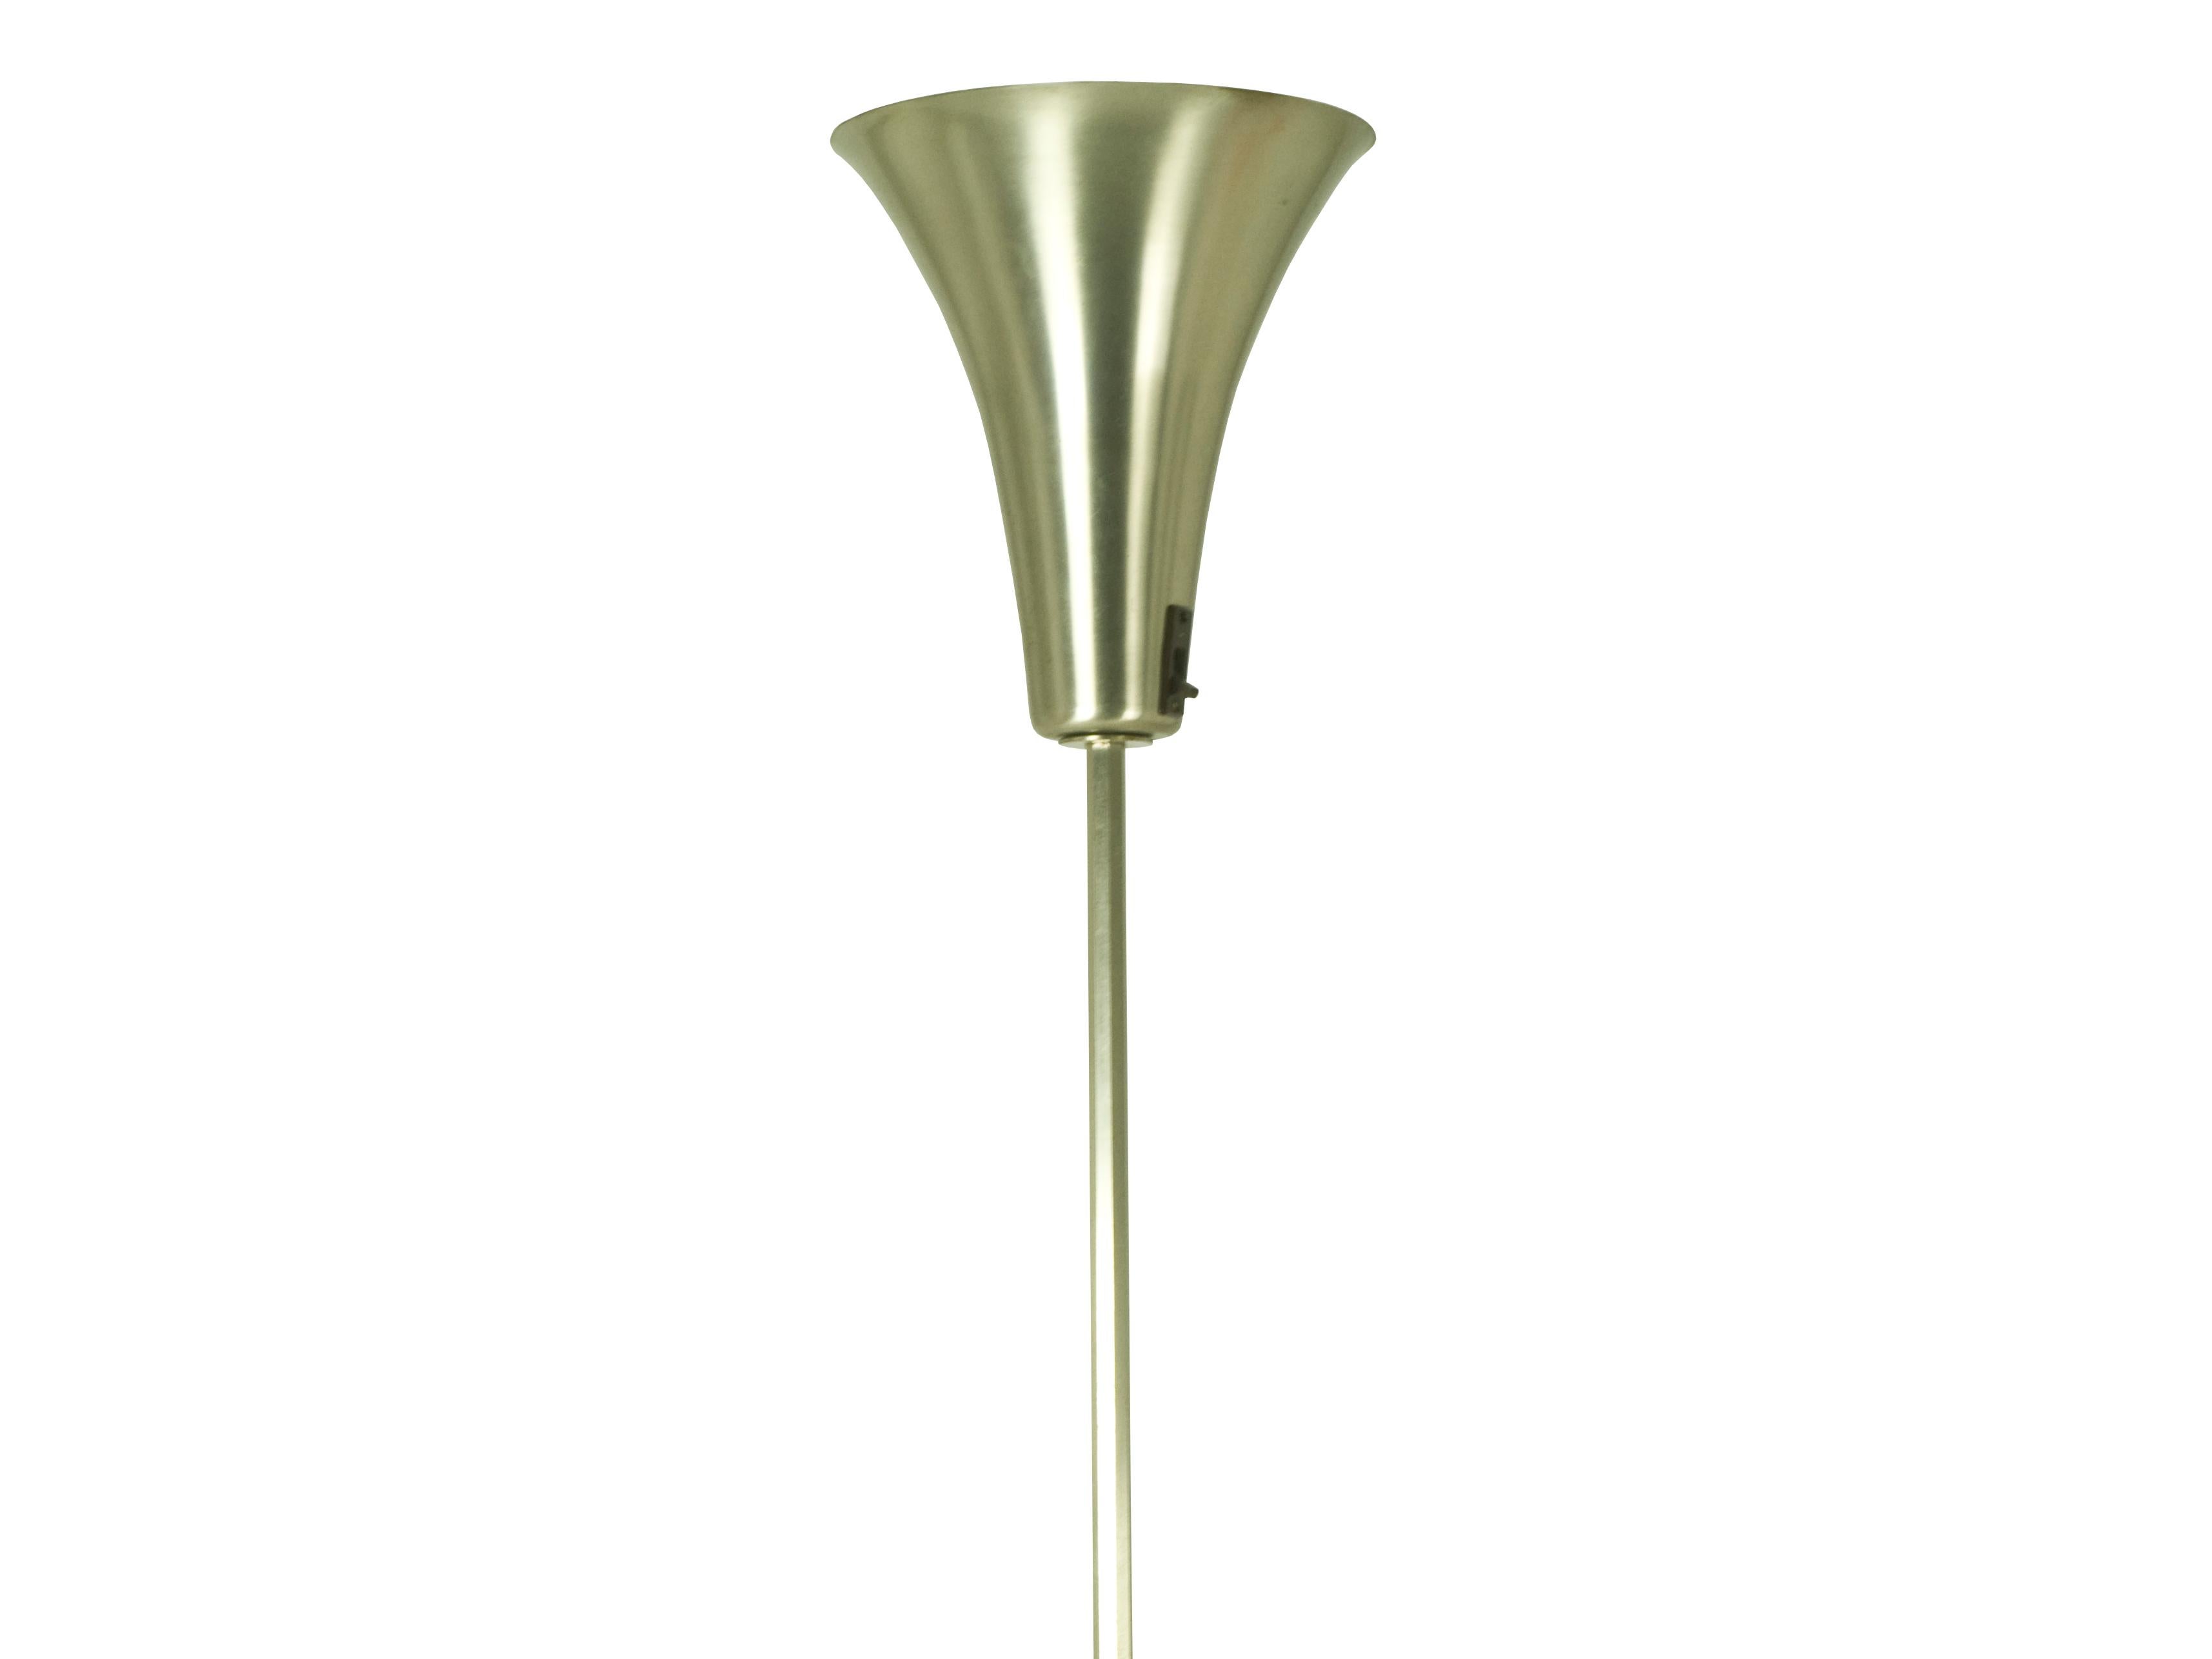 This Luminator/floor lamp was designed and produced in Italy around the 1940s. It is made from nickeled brass and aluminium and it remains in good vintage condition: sign and wear consistent with age and use; its original bakelite switch on the